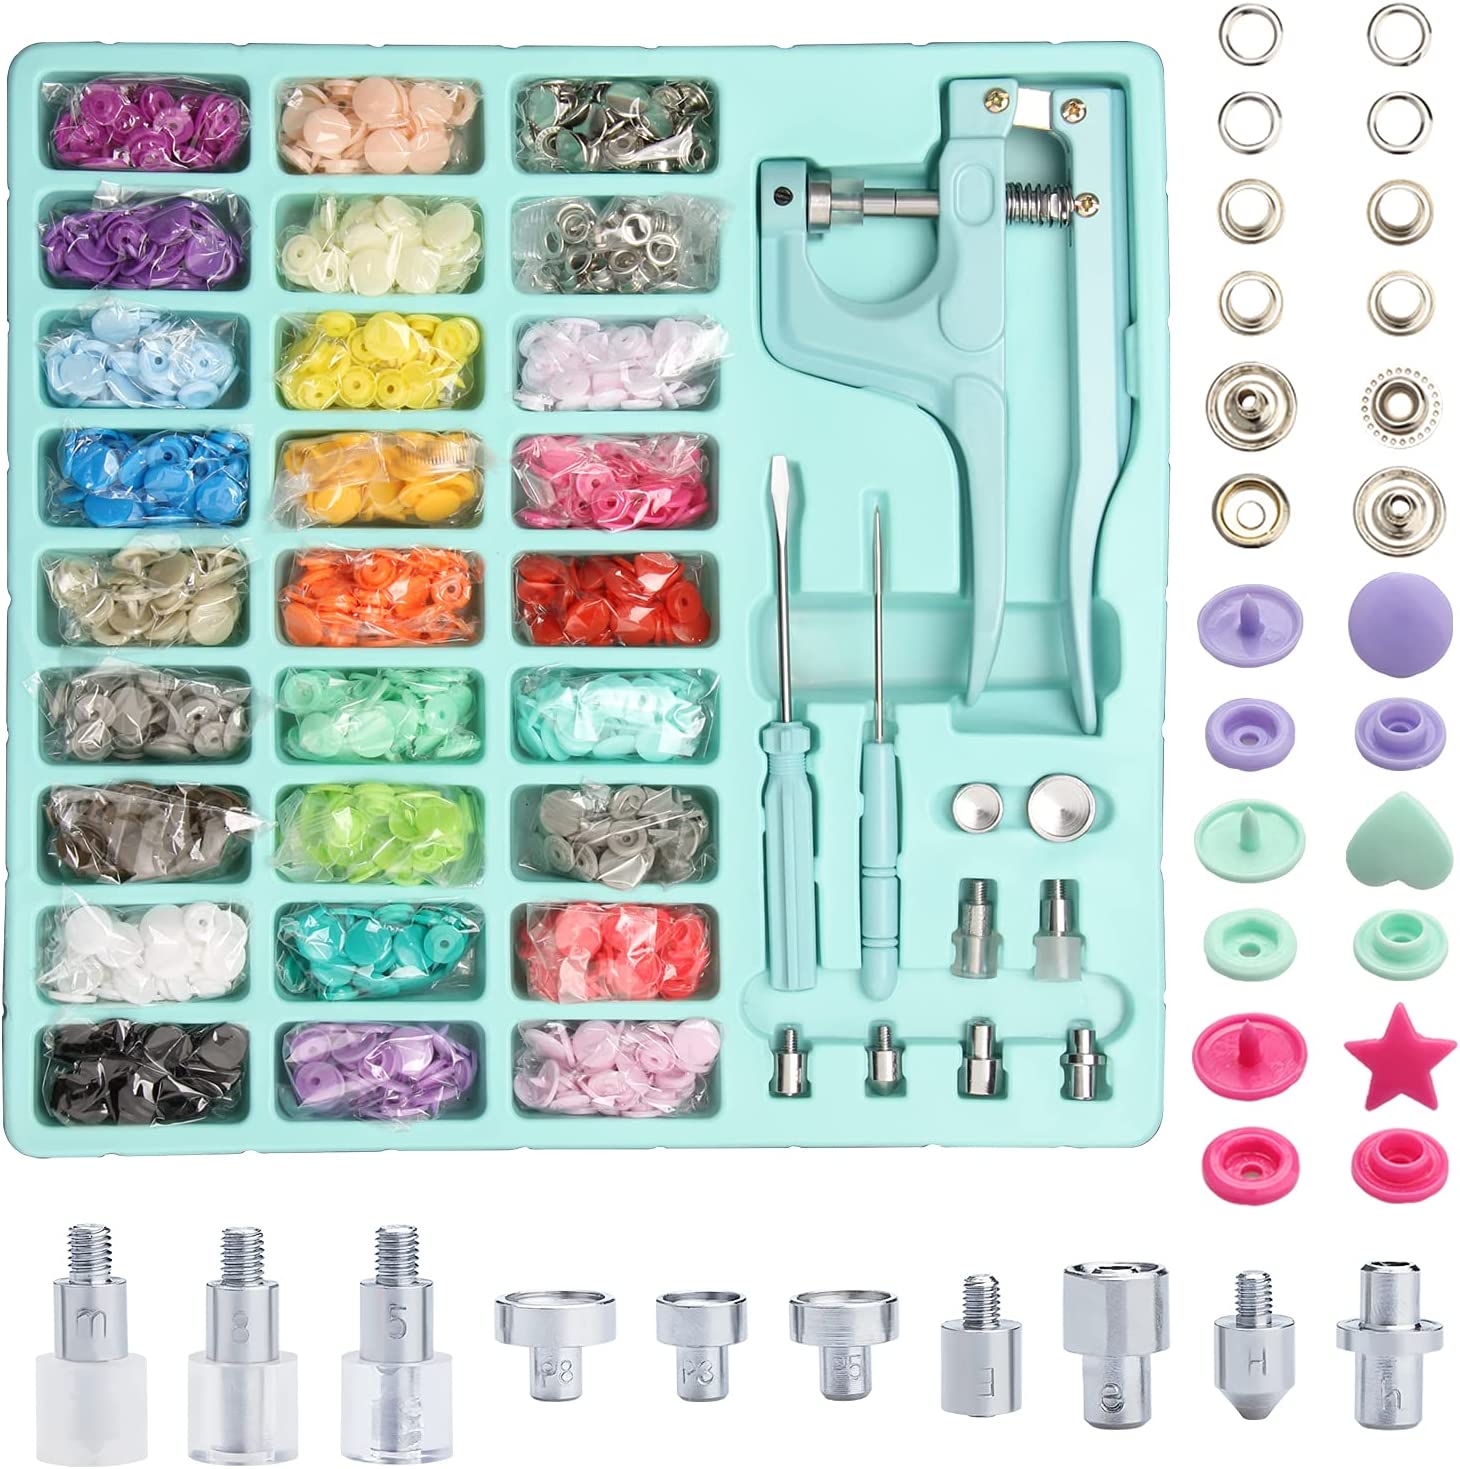 ilauke 400 Sets Snap Buttons with Snap Pliers T5 Plastic Snaps No-Sew Buttons